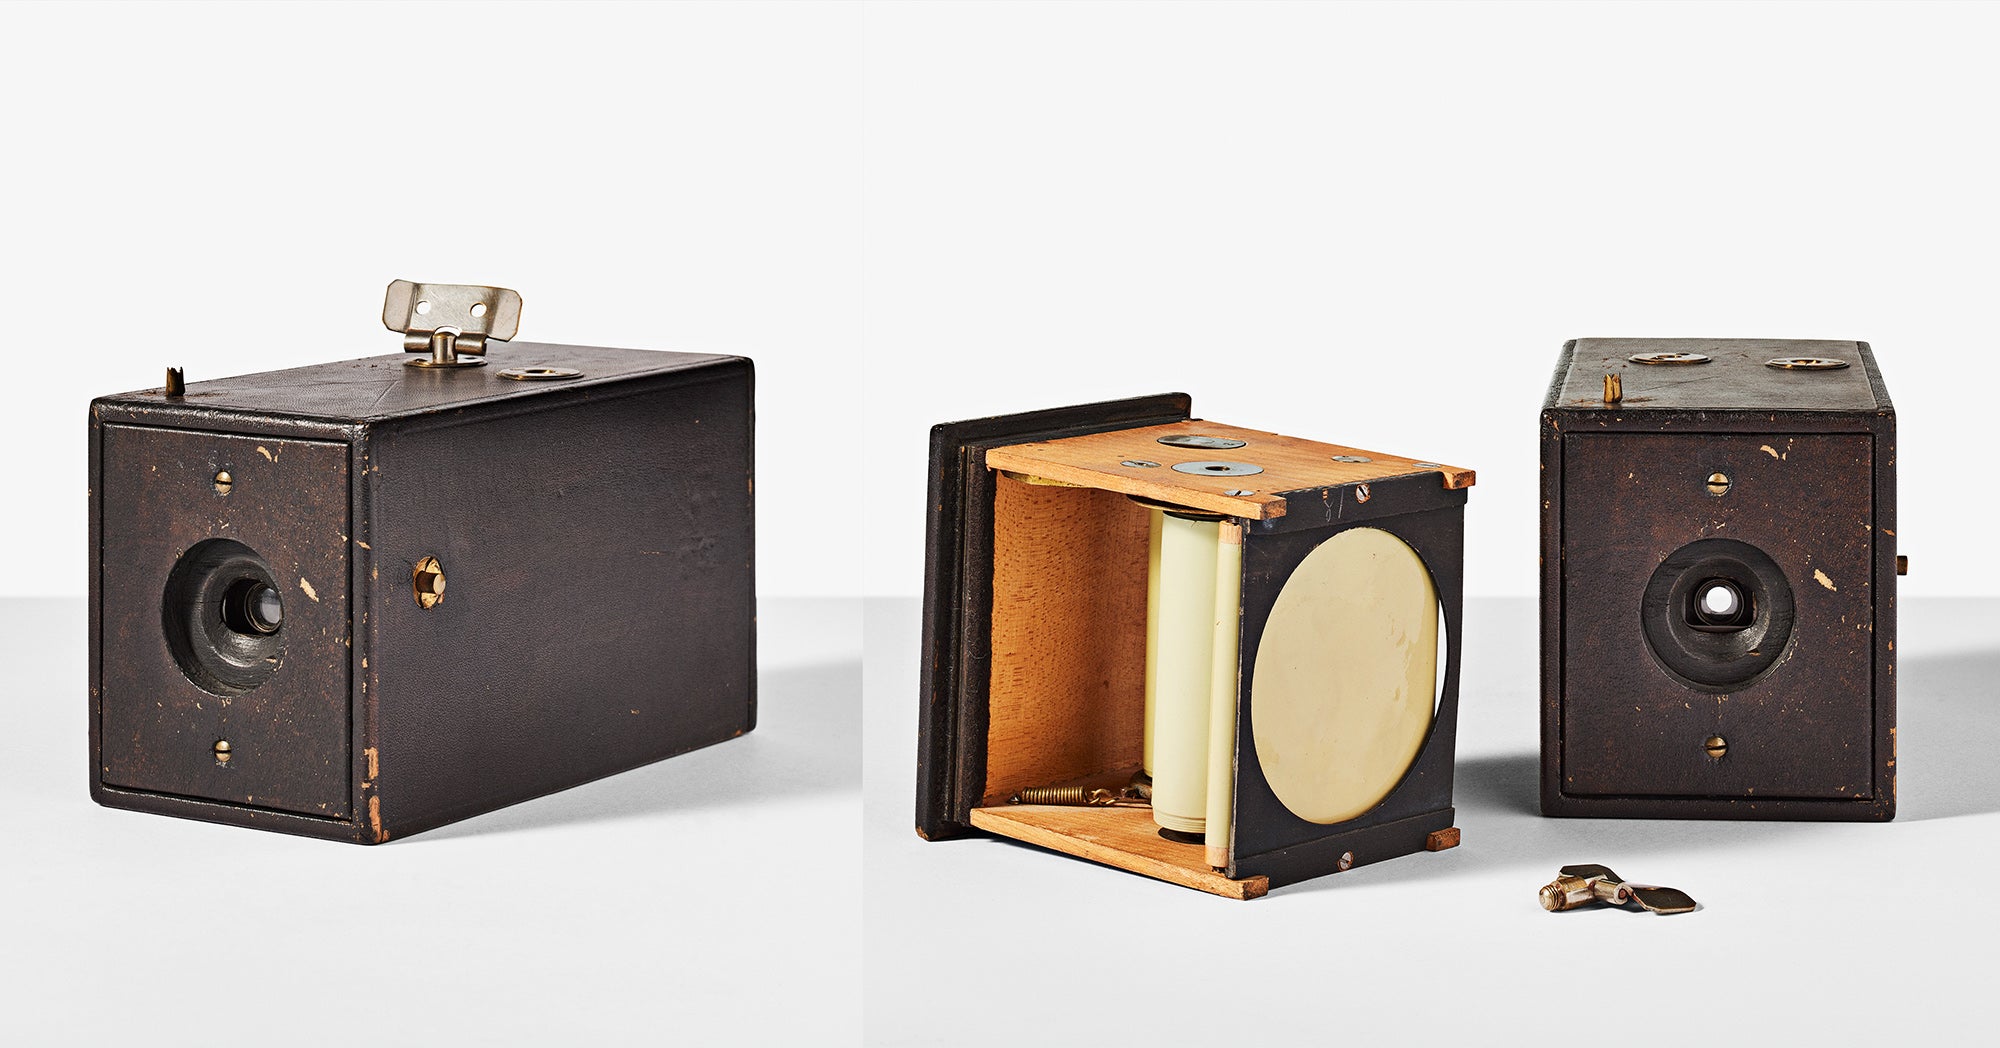 original Kodak camera from 1988, interior and exterior view, isolated on a background